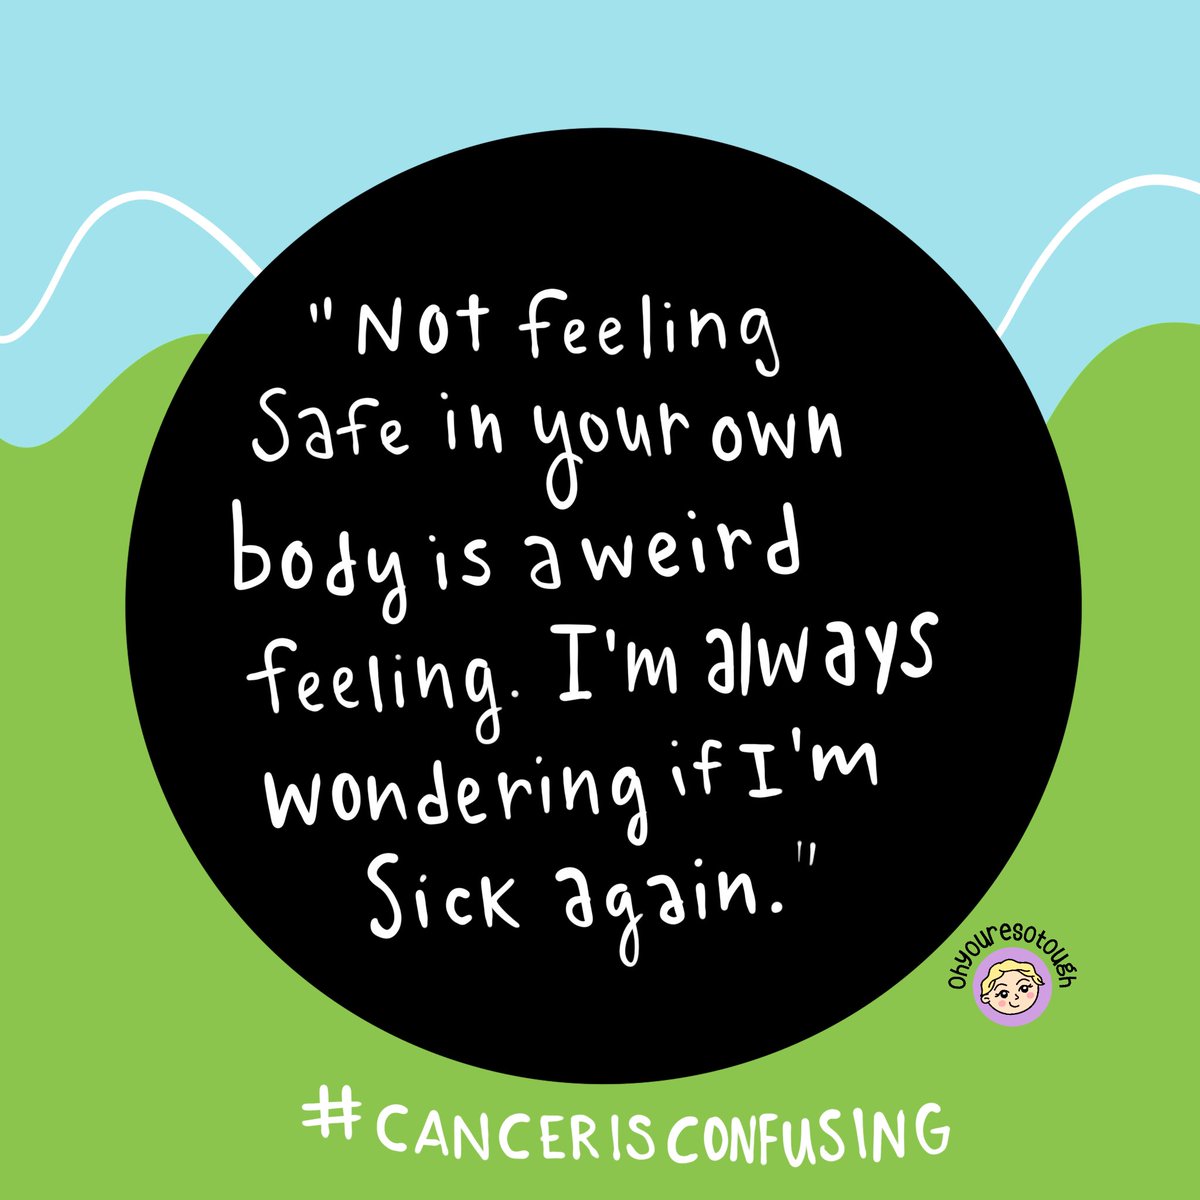 A “cancer is confusing” thought directly from a member of the cancer community. ❤️‍🩹